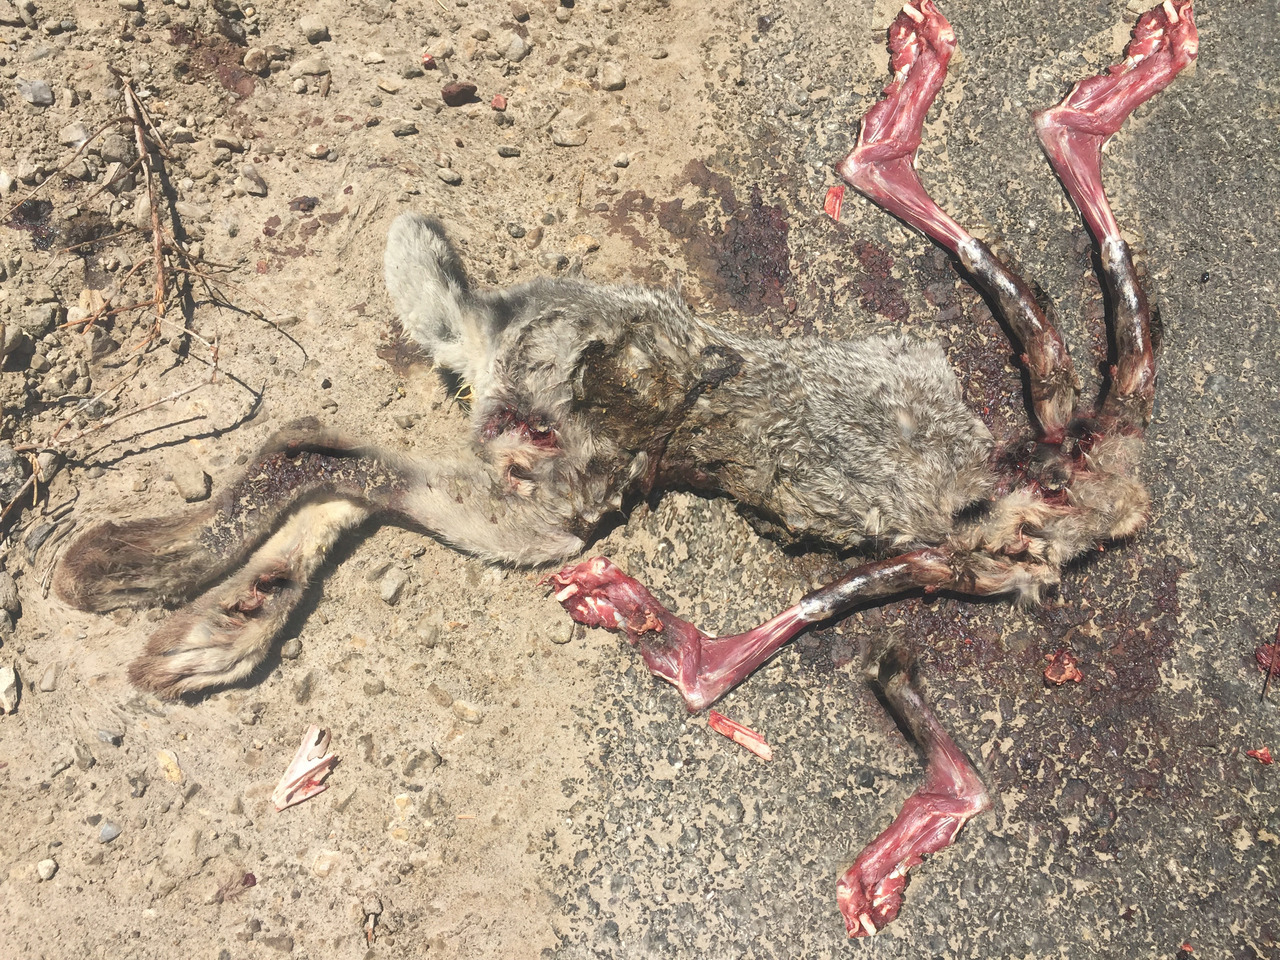 Photo of a dead rabbit on the side of the road, edited so that it has multiple extra legs